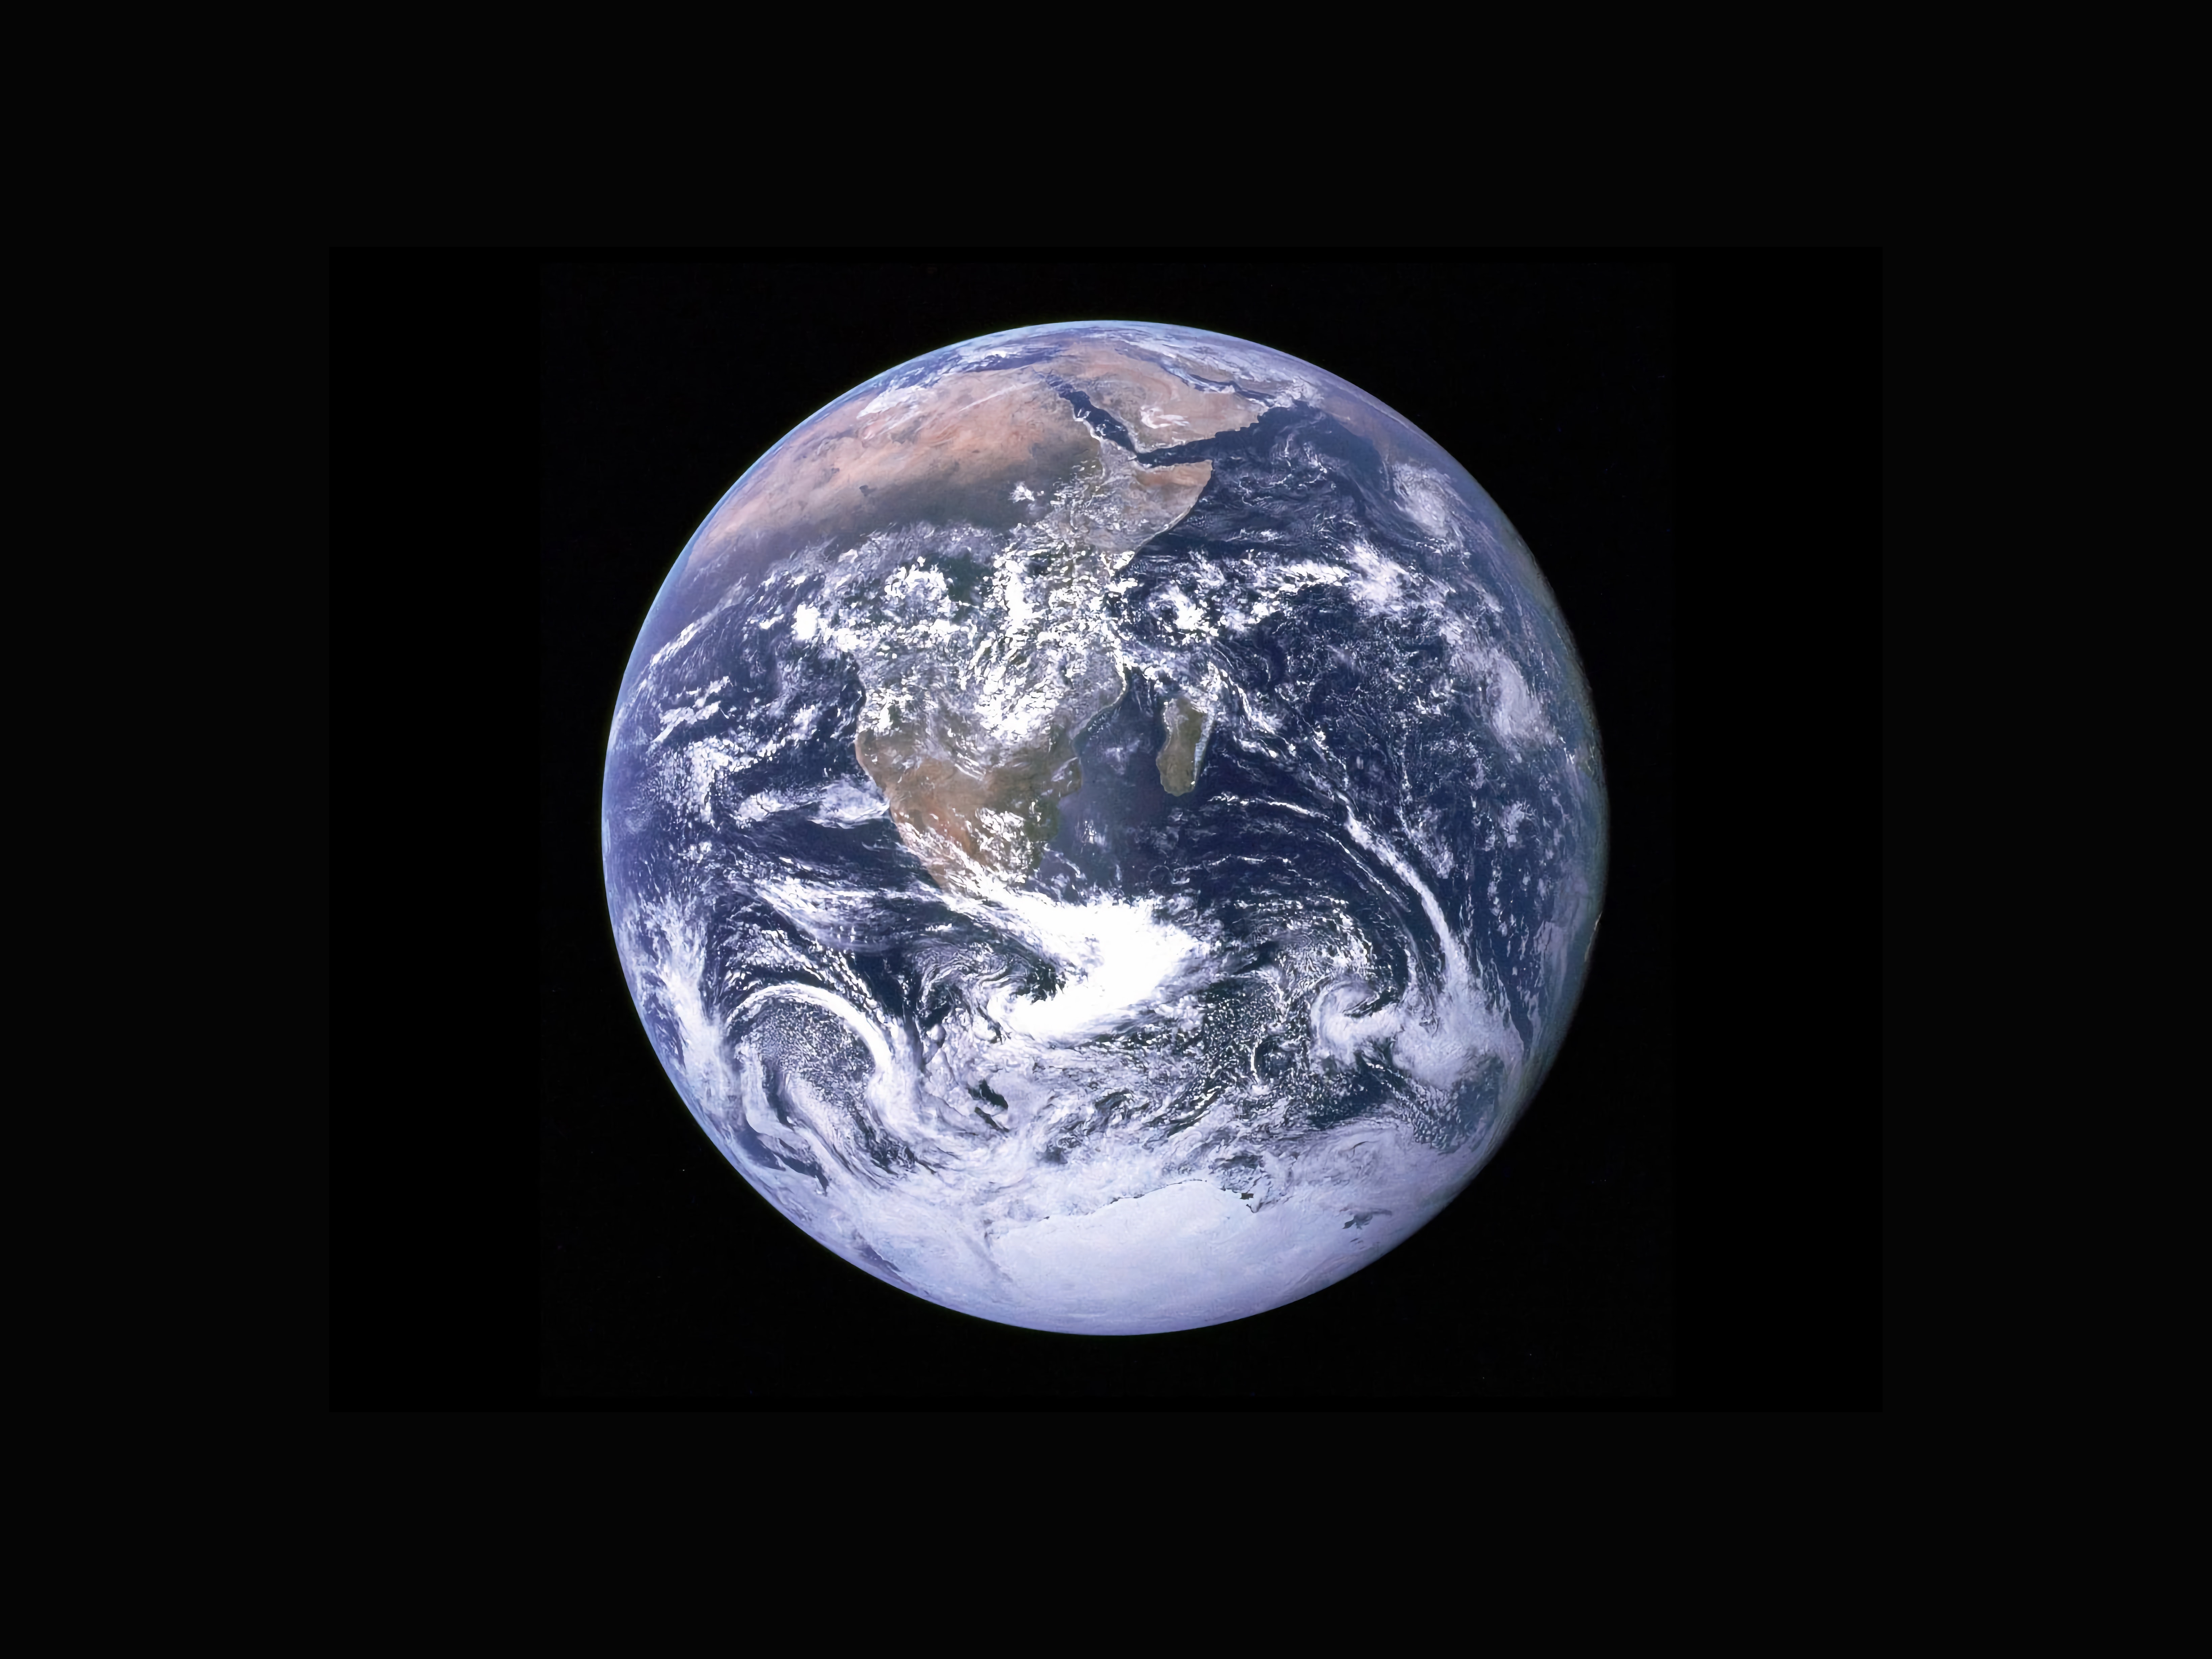 The Earth as seen by the Apollo 17 crew traveling toward the moon.